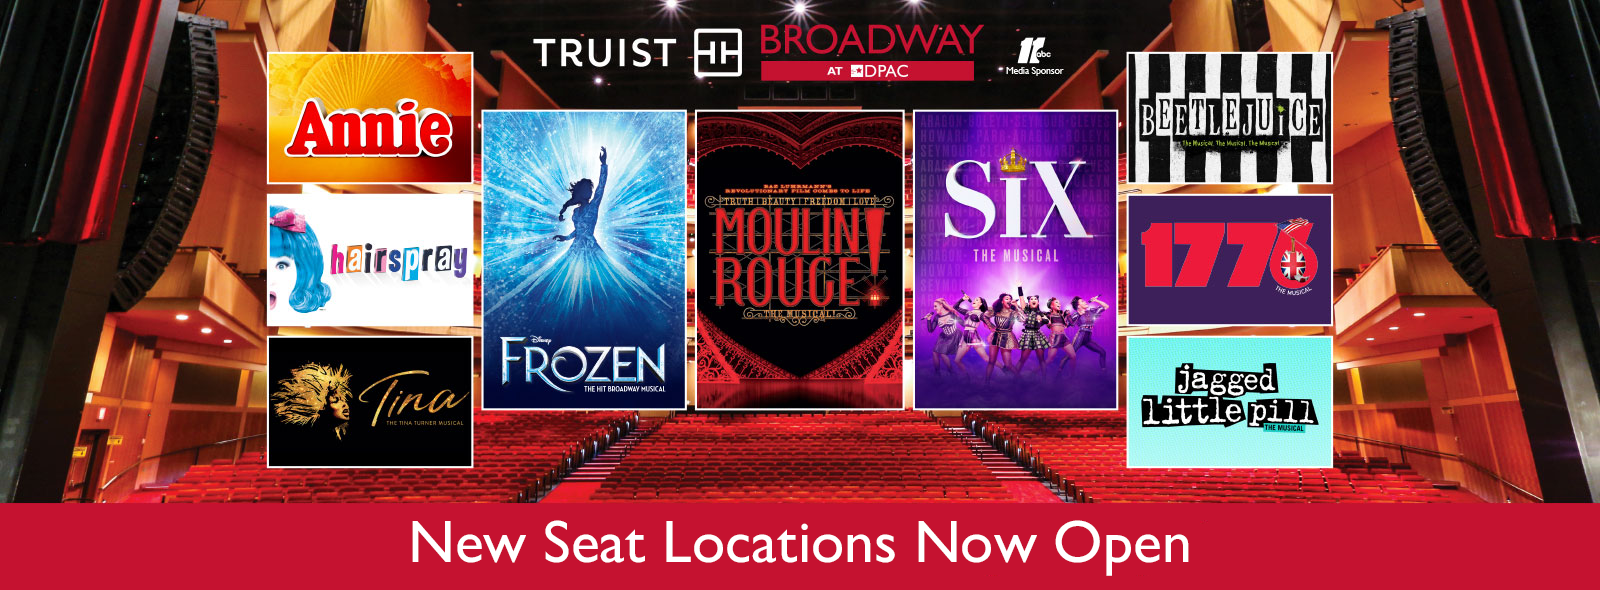 Become a Truist Broadway Member